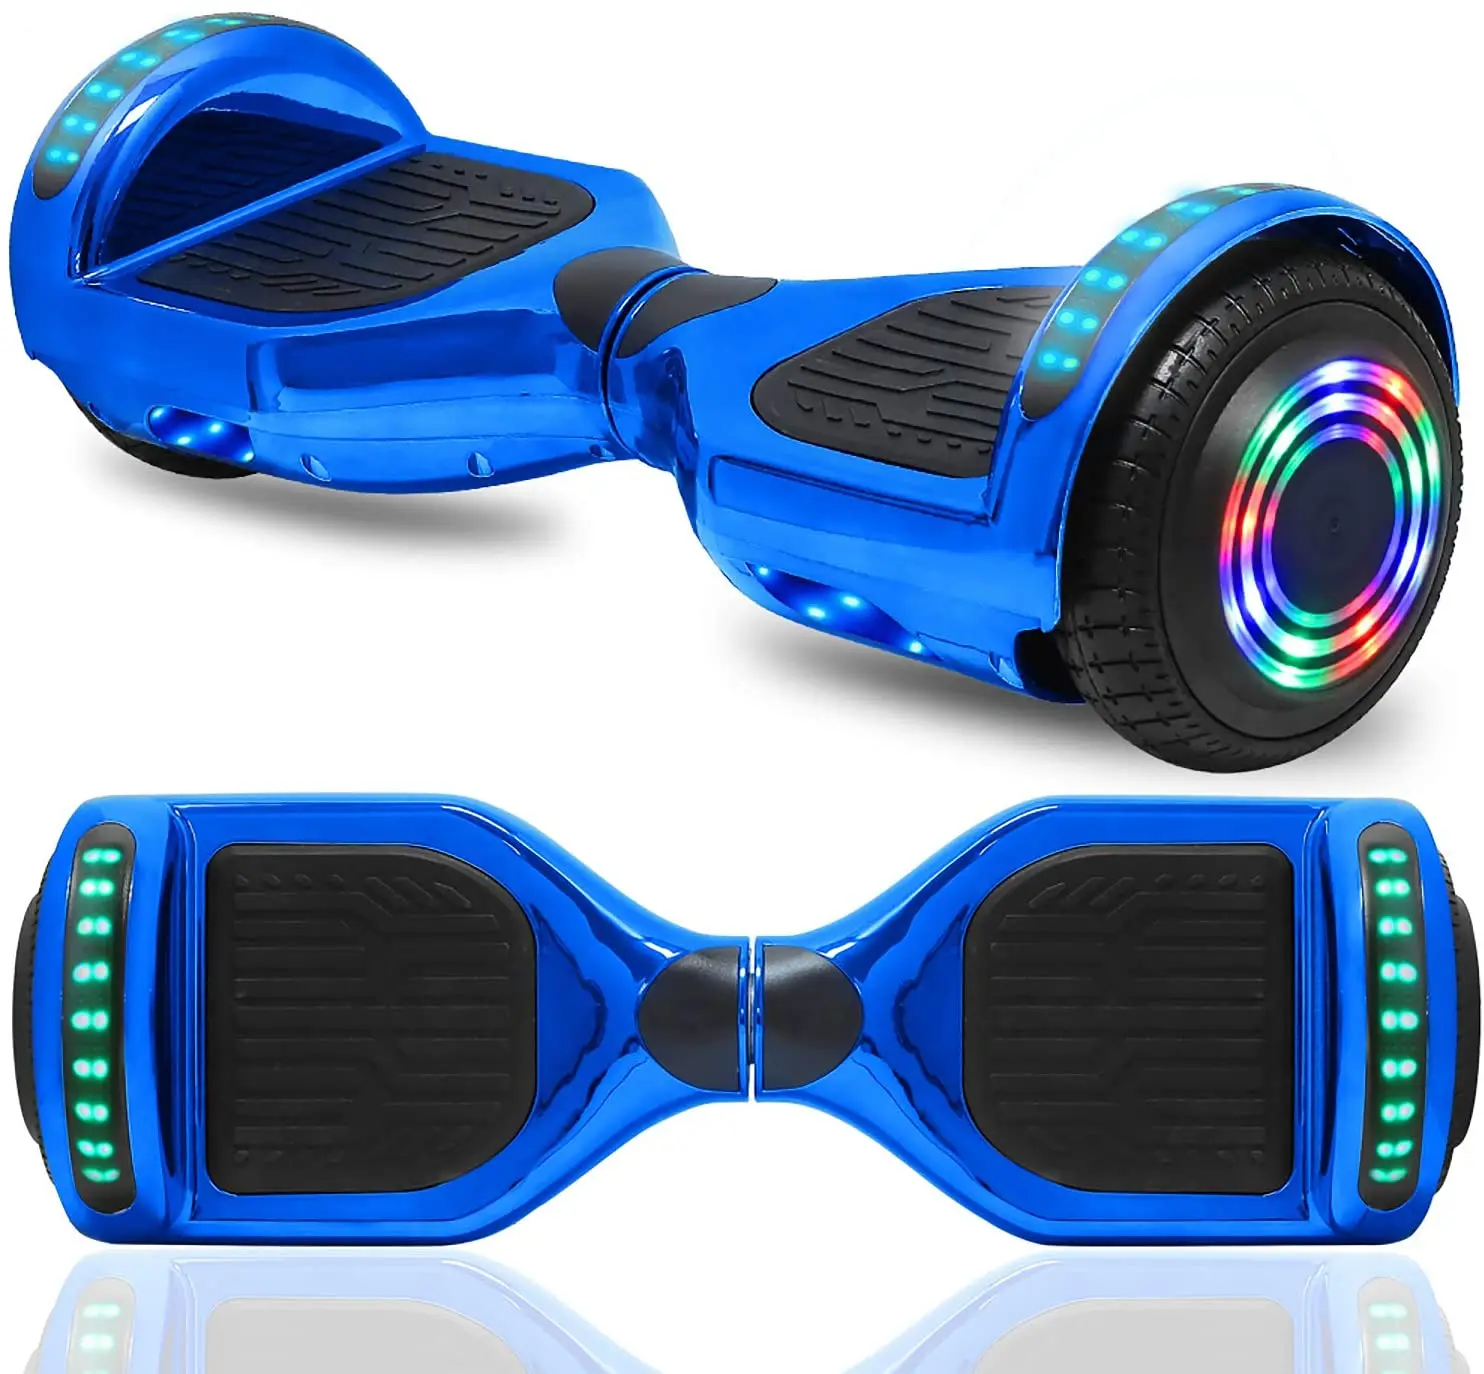 CHO NEW Generation Electric Hoverboard Two Wheels Smart Self Balancing  Scooter Hoover Board with Built in Speaker Flashing LED Light